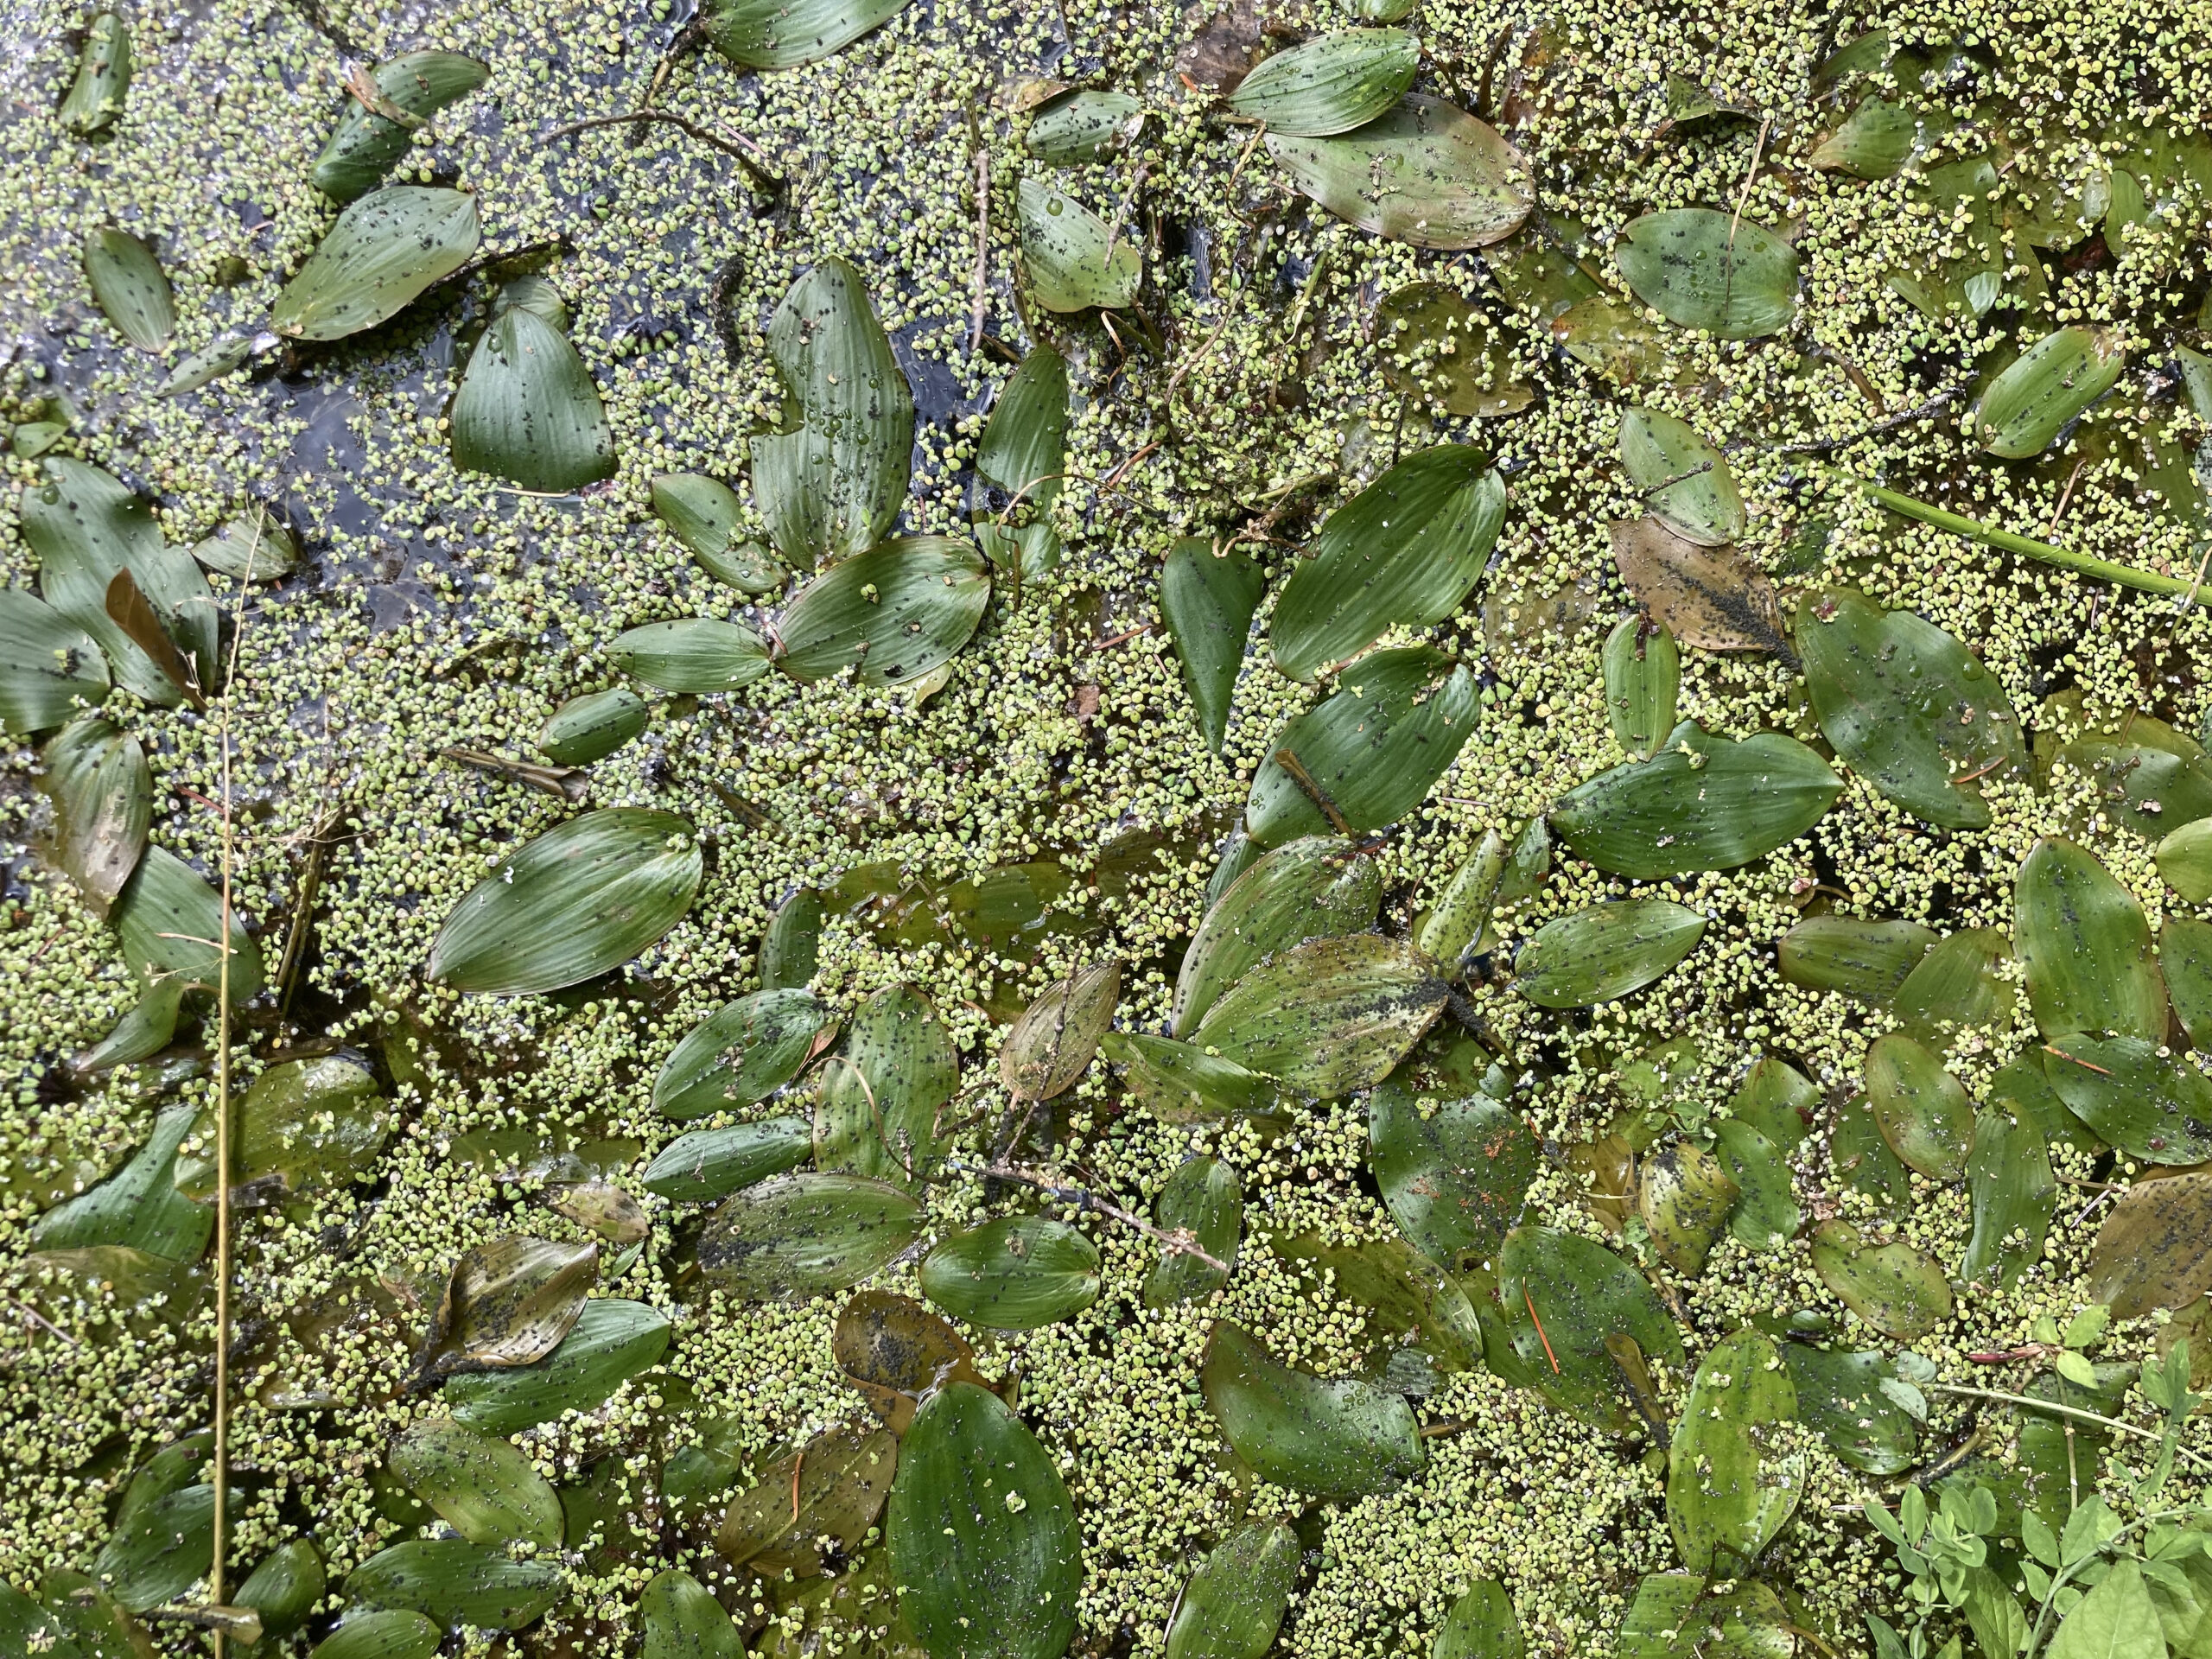 Close up image of aquatic plants floating on the surface of water, found in wetlands within the Riverside Fire Complex. There are shiny green leaves intermingled with lighter green seed pod like material.